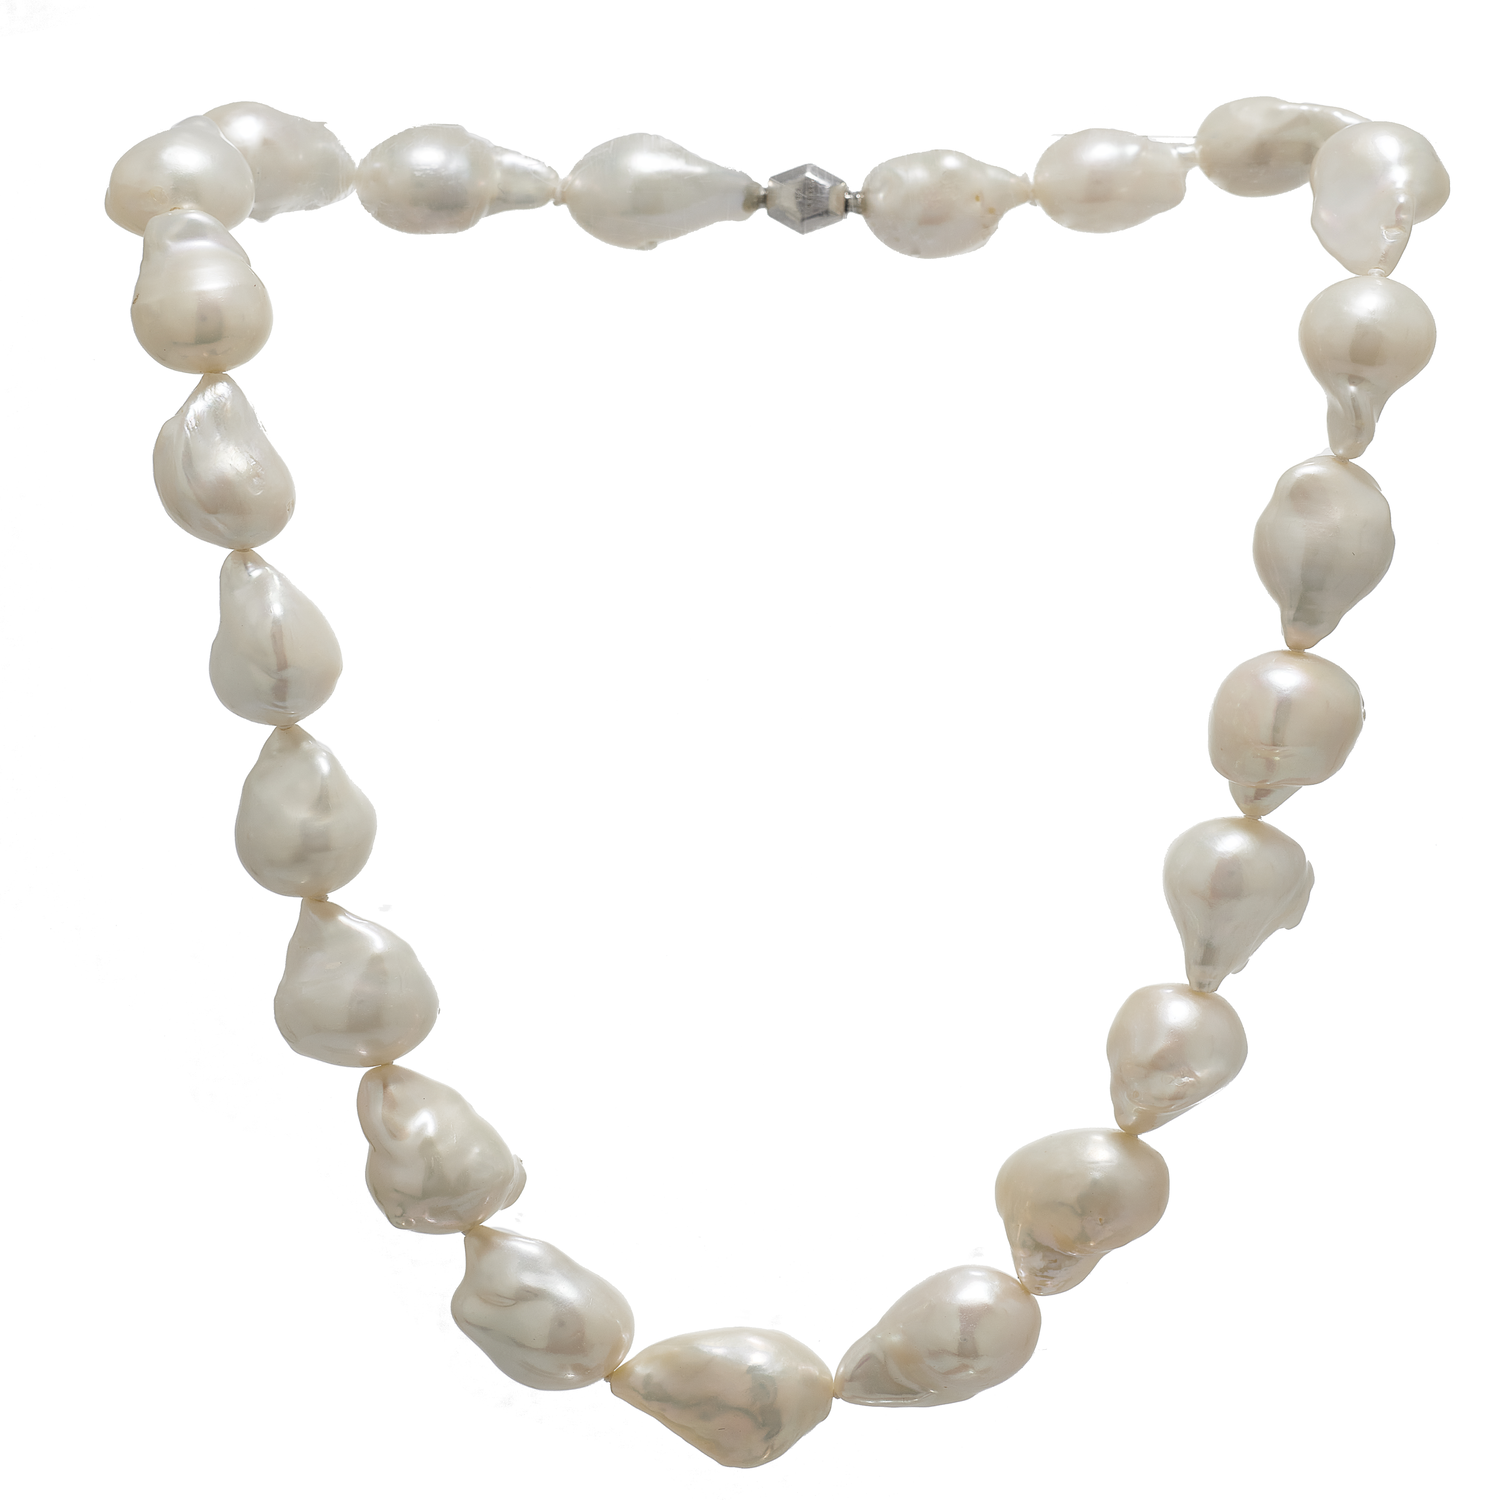 Baroque Freshwater Pearls Necklace T3 12mm - Carrie K. 